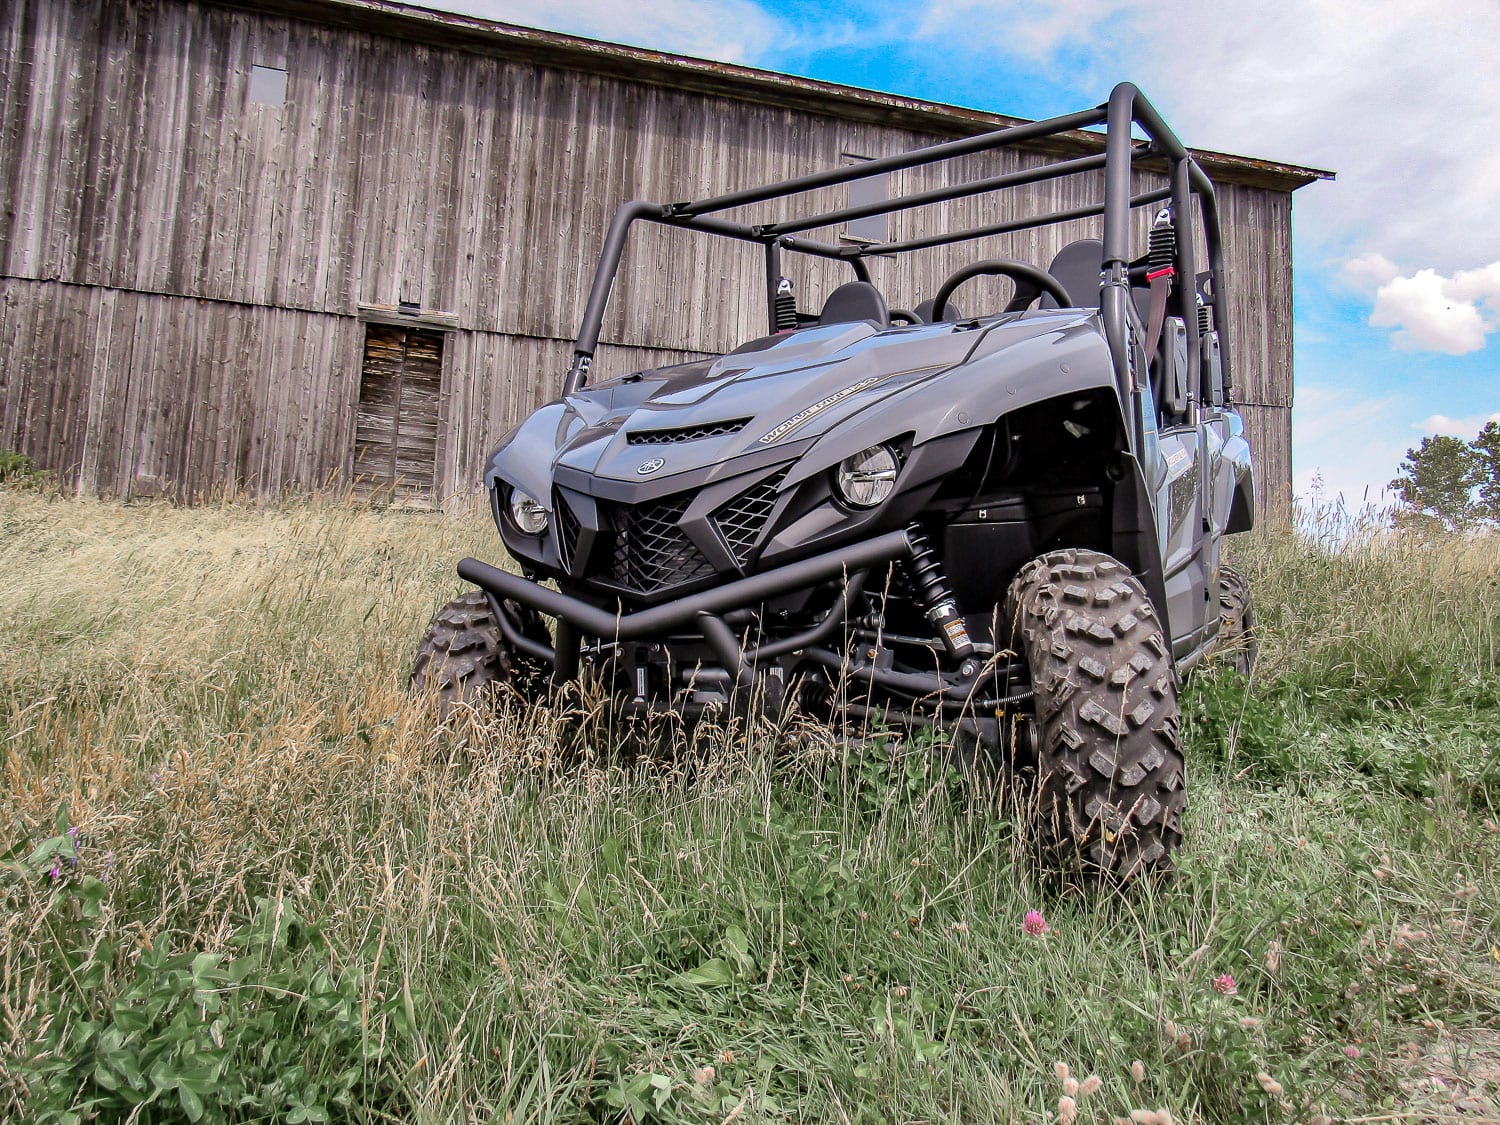 2018 Yamaha Wolverine 850 X4 Review